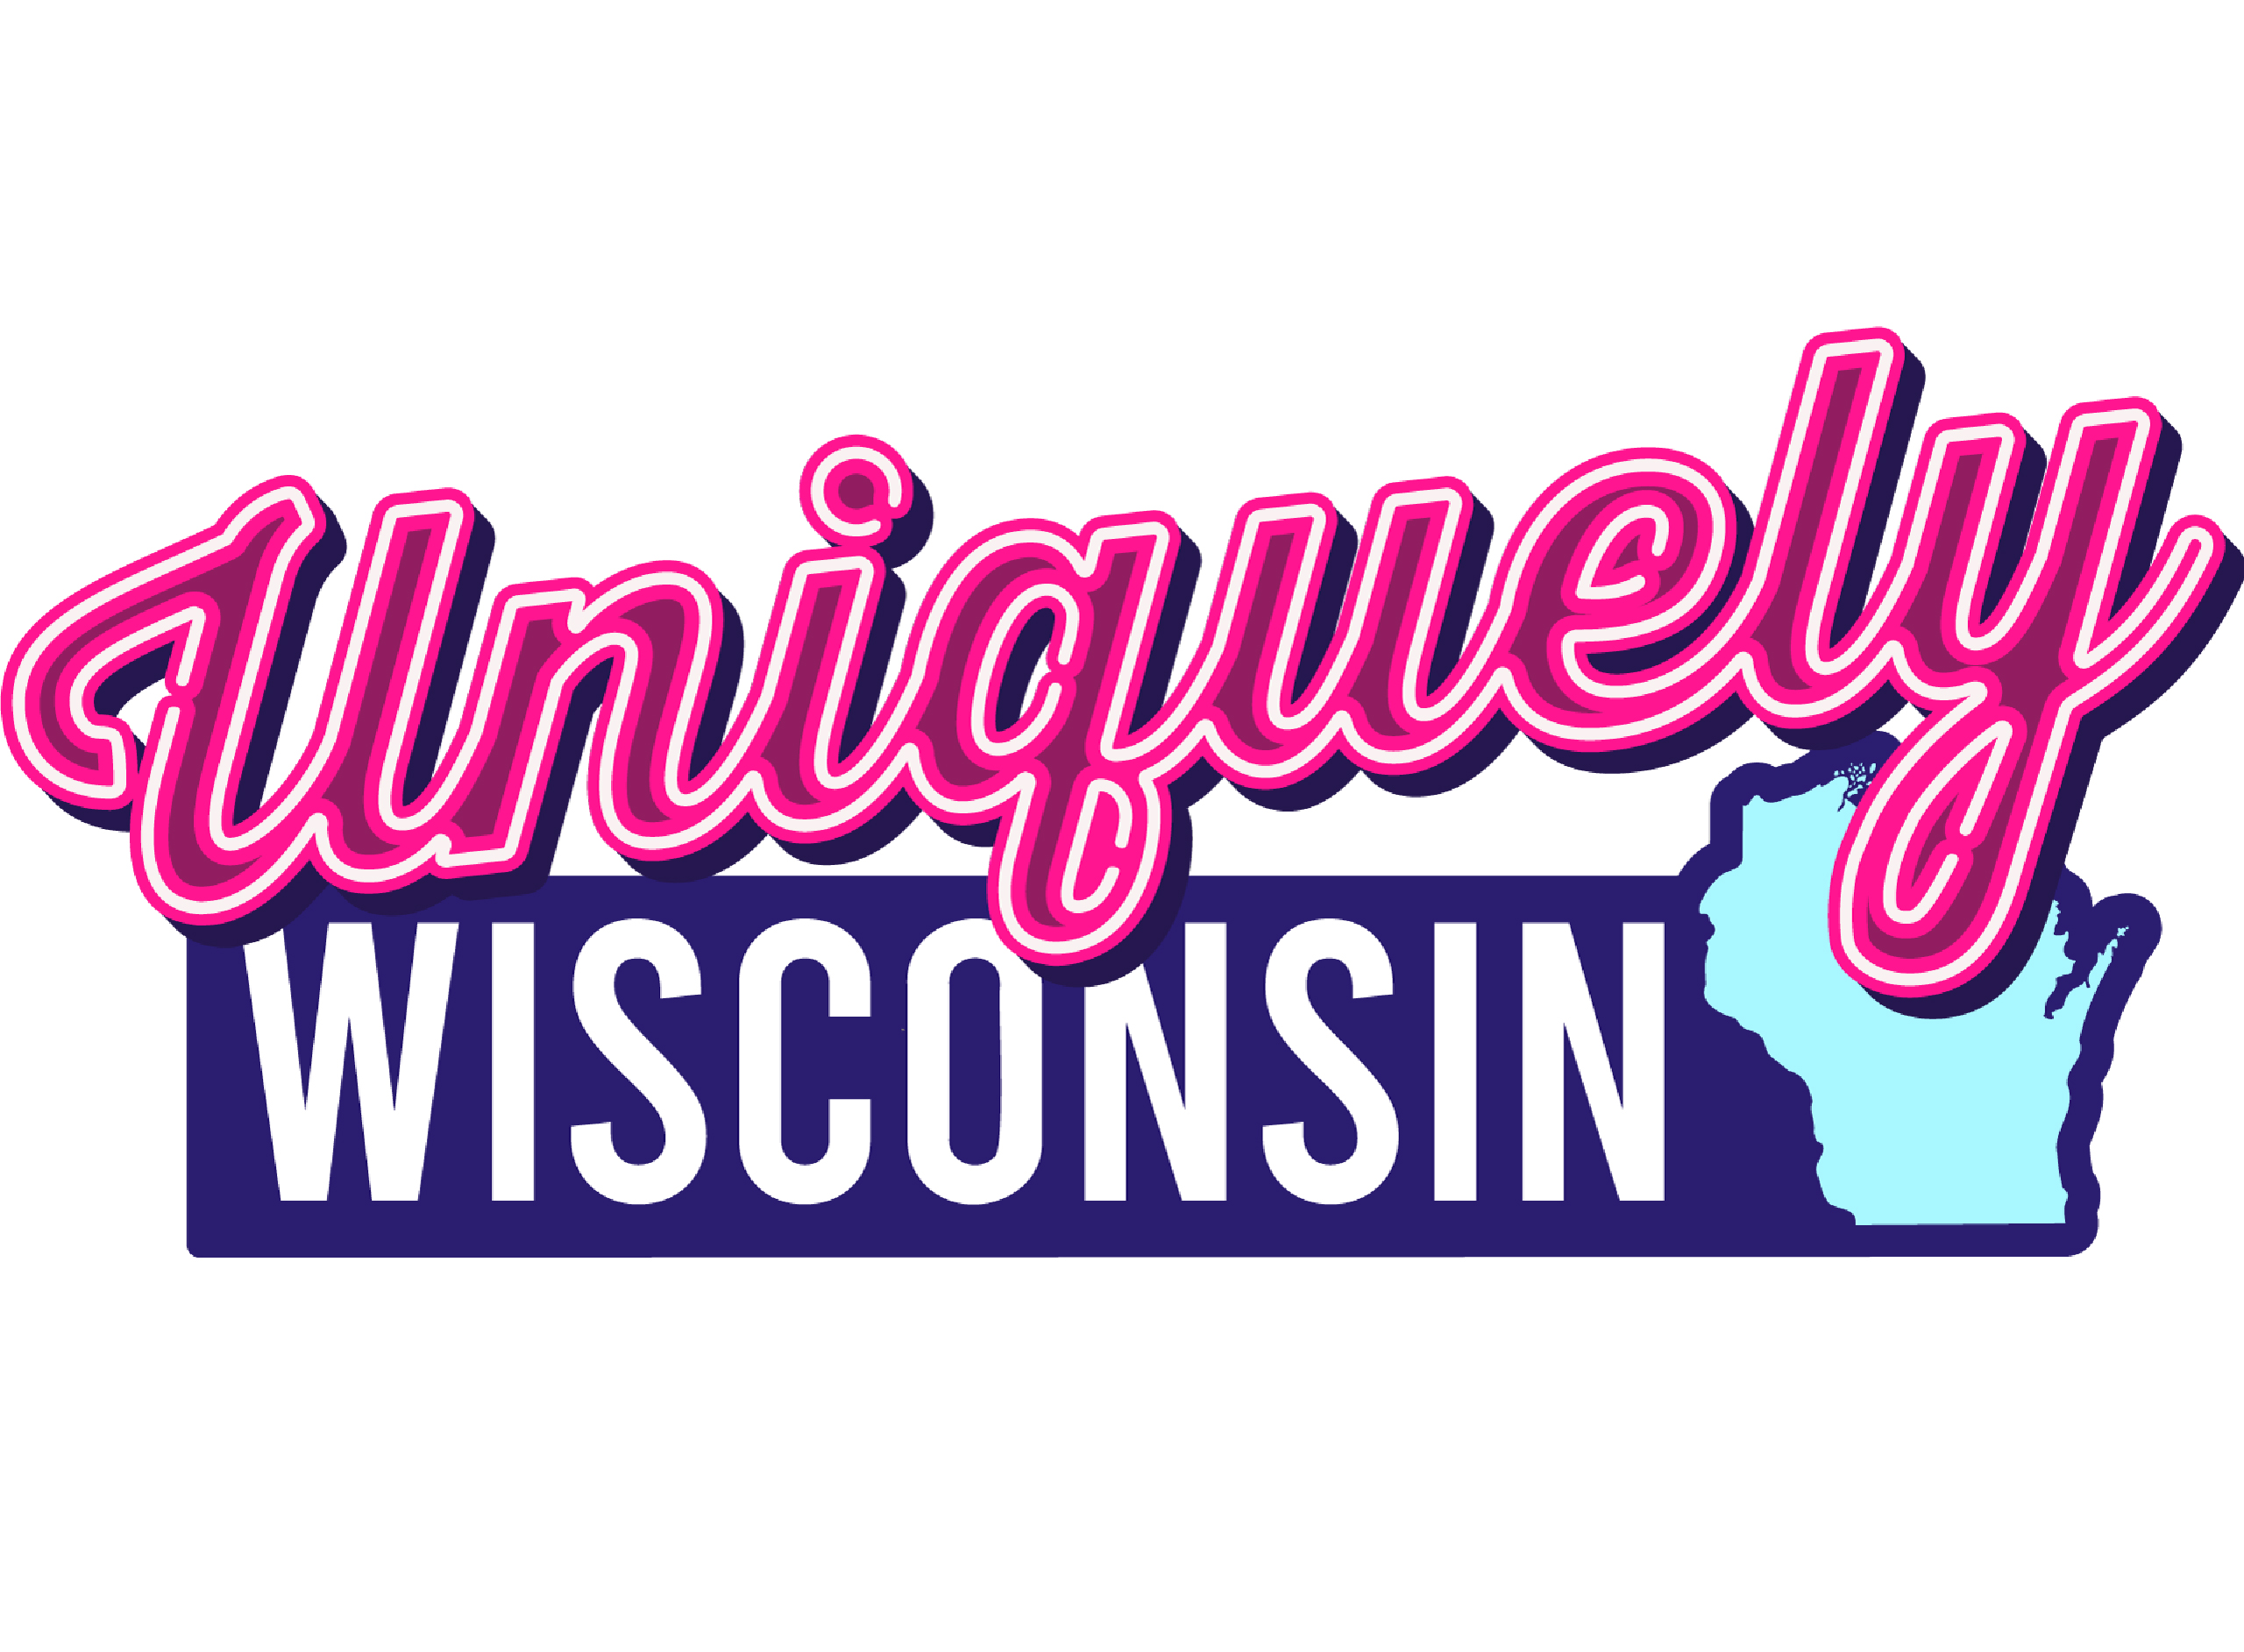 New Uniquely Wisconsin Brand Highlights the People, Culture and History of Our State: Watch & Listen!